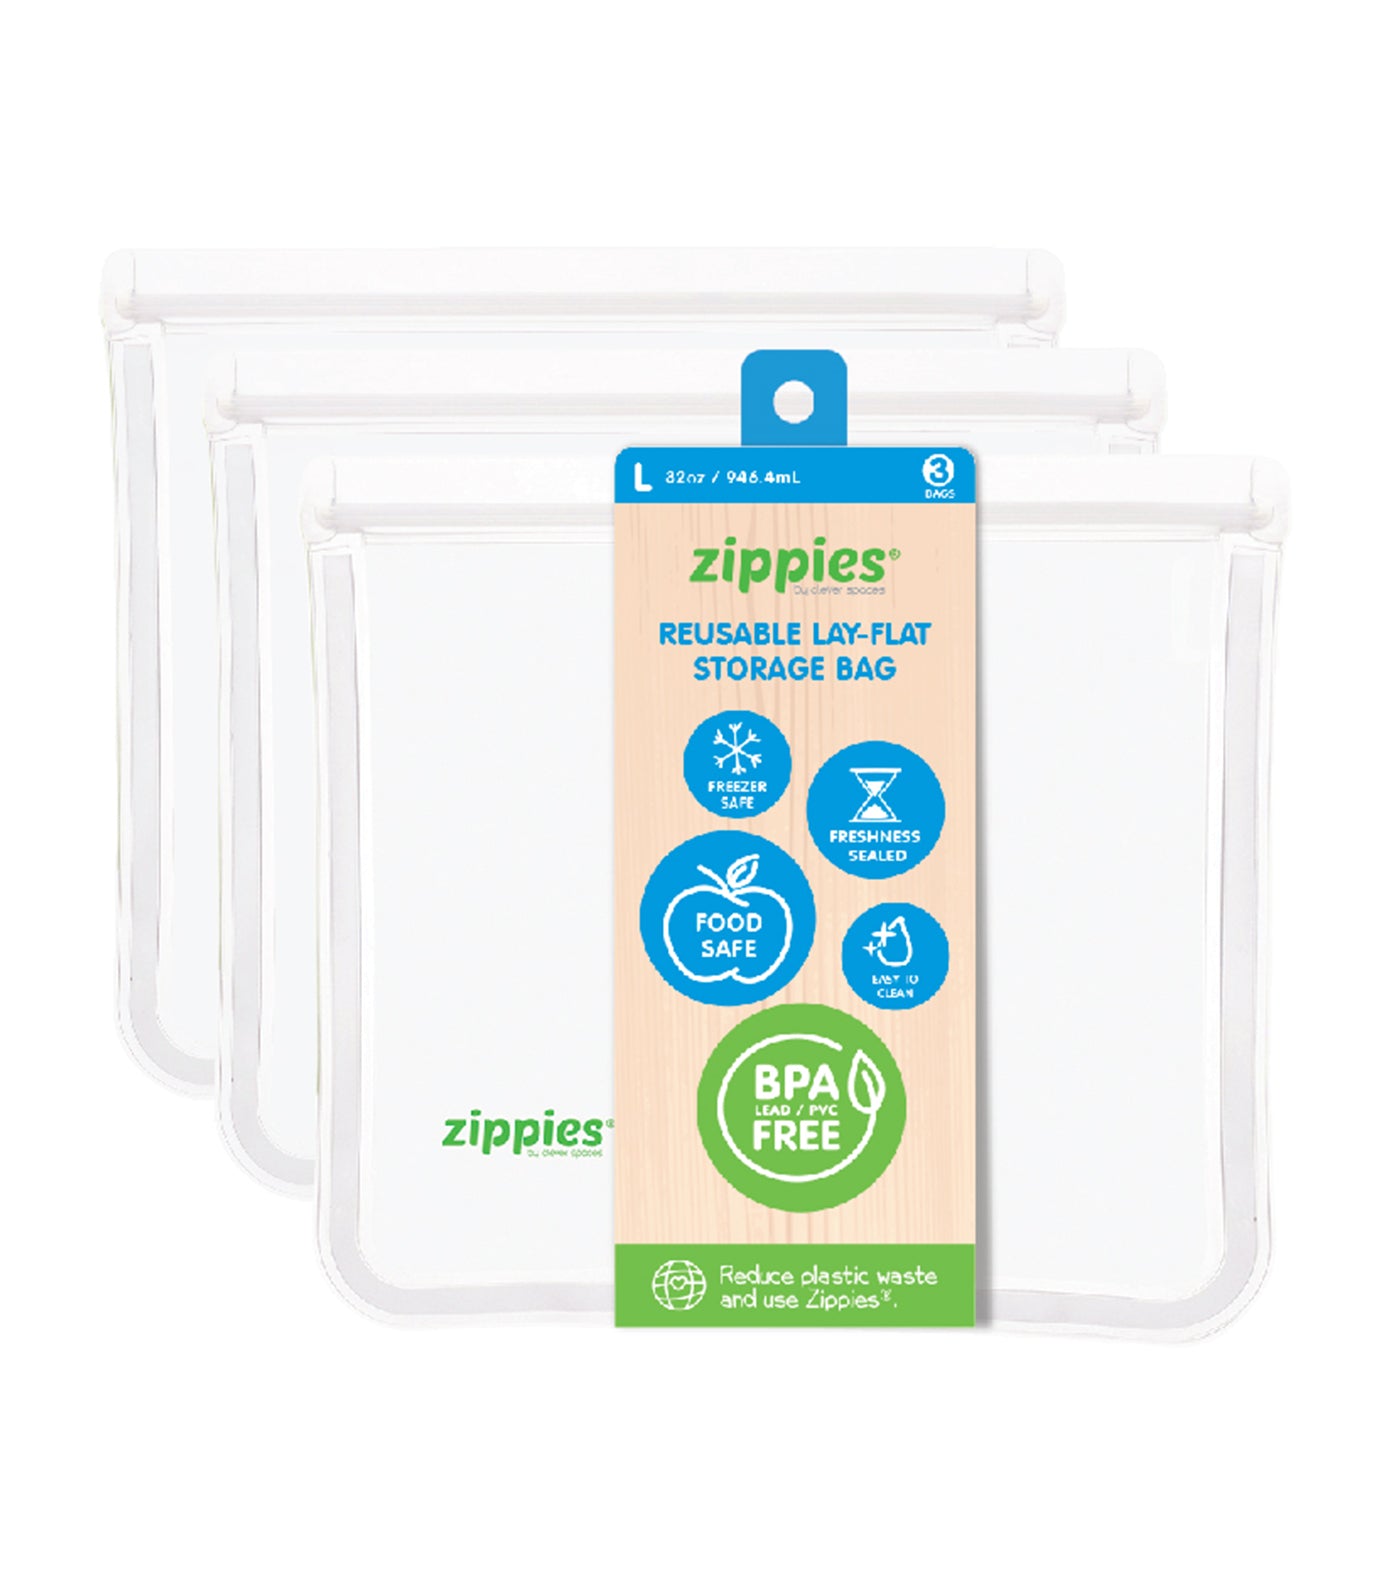 zippies clear lay-flat storage bags - large (3 bags)